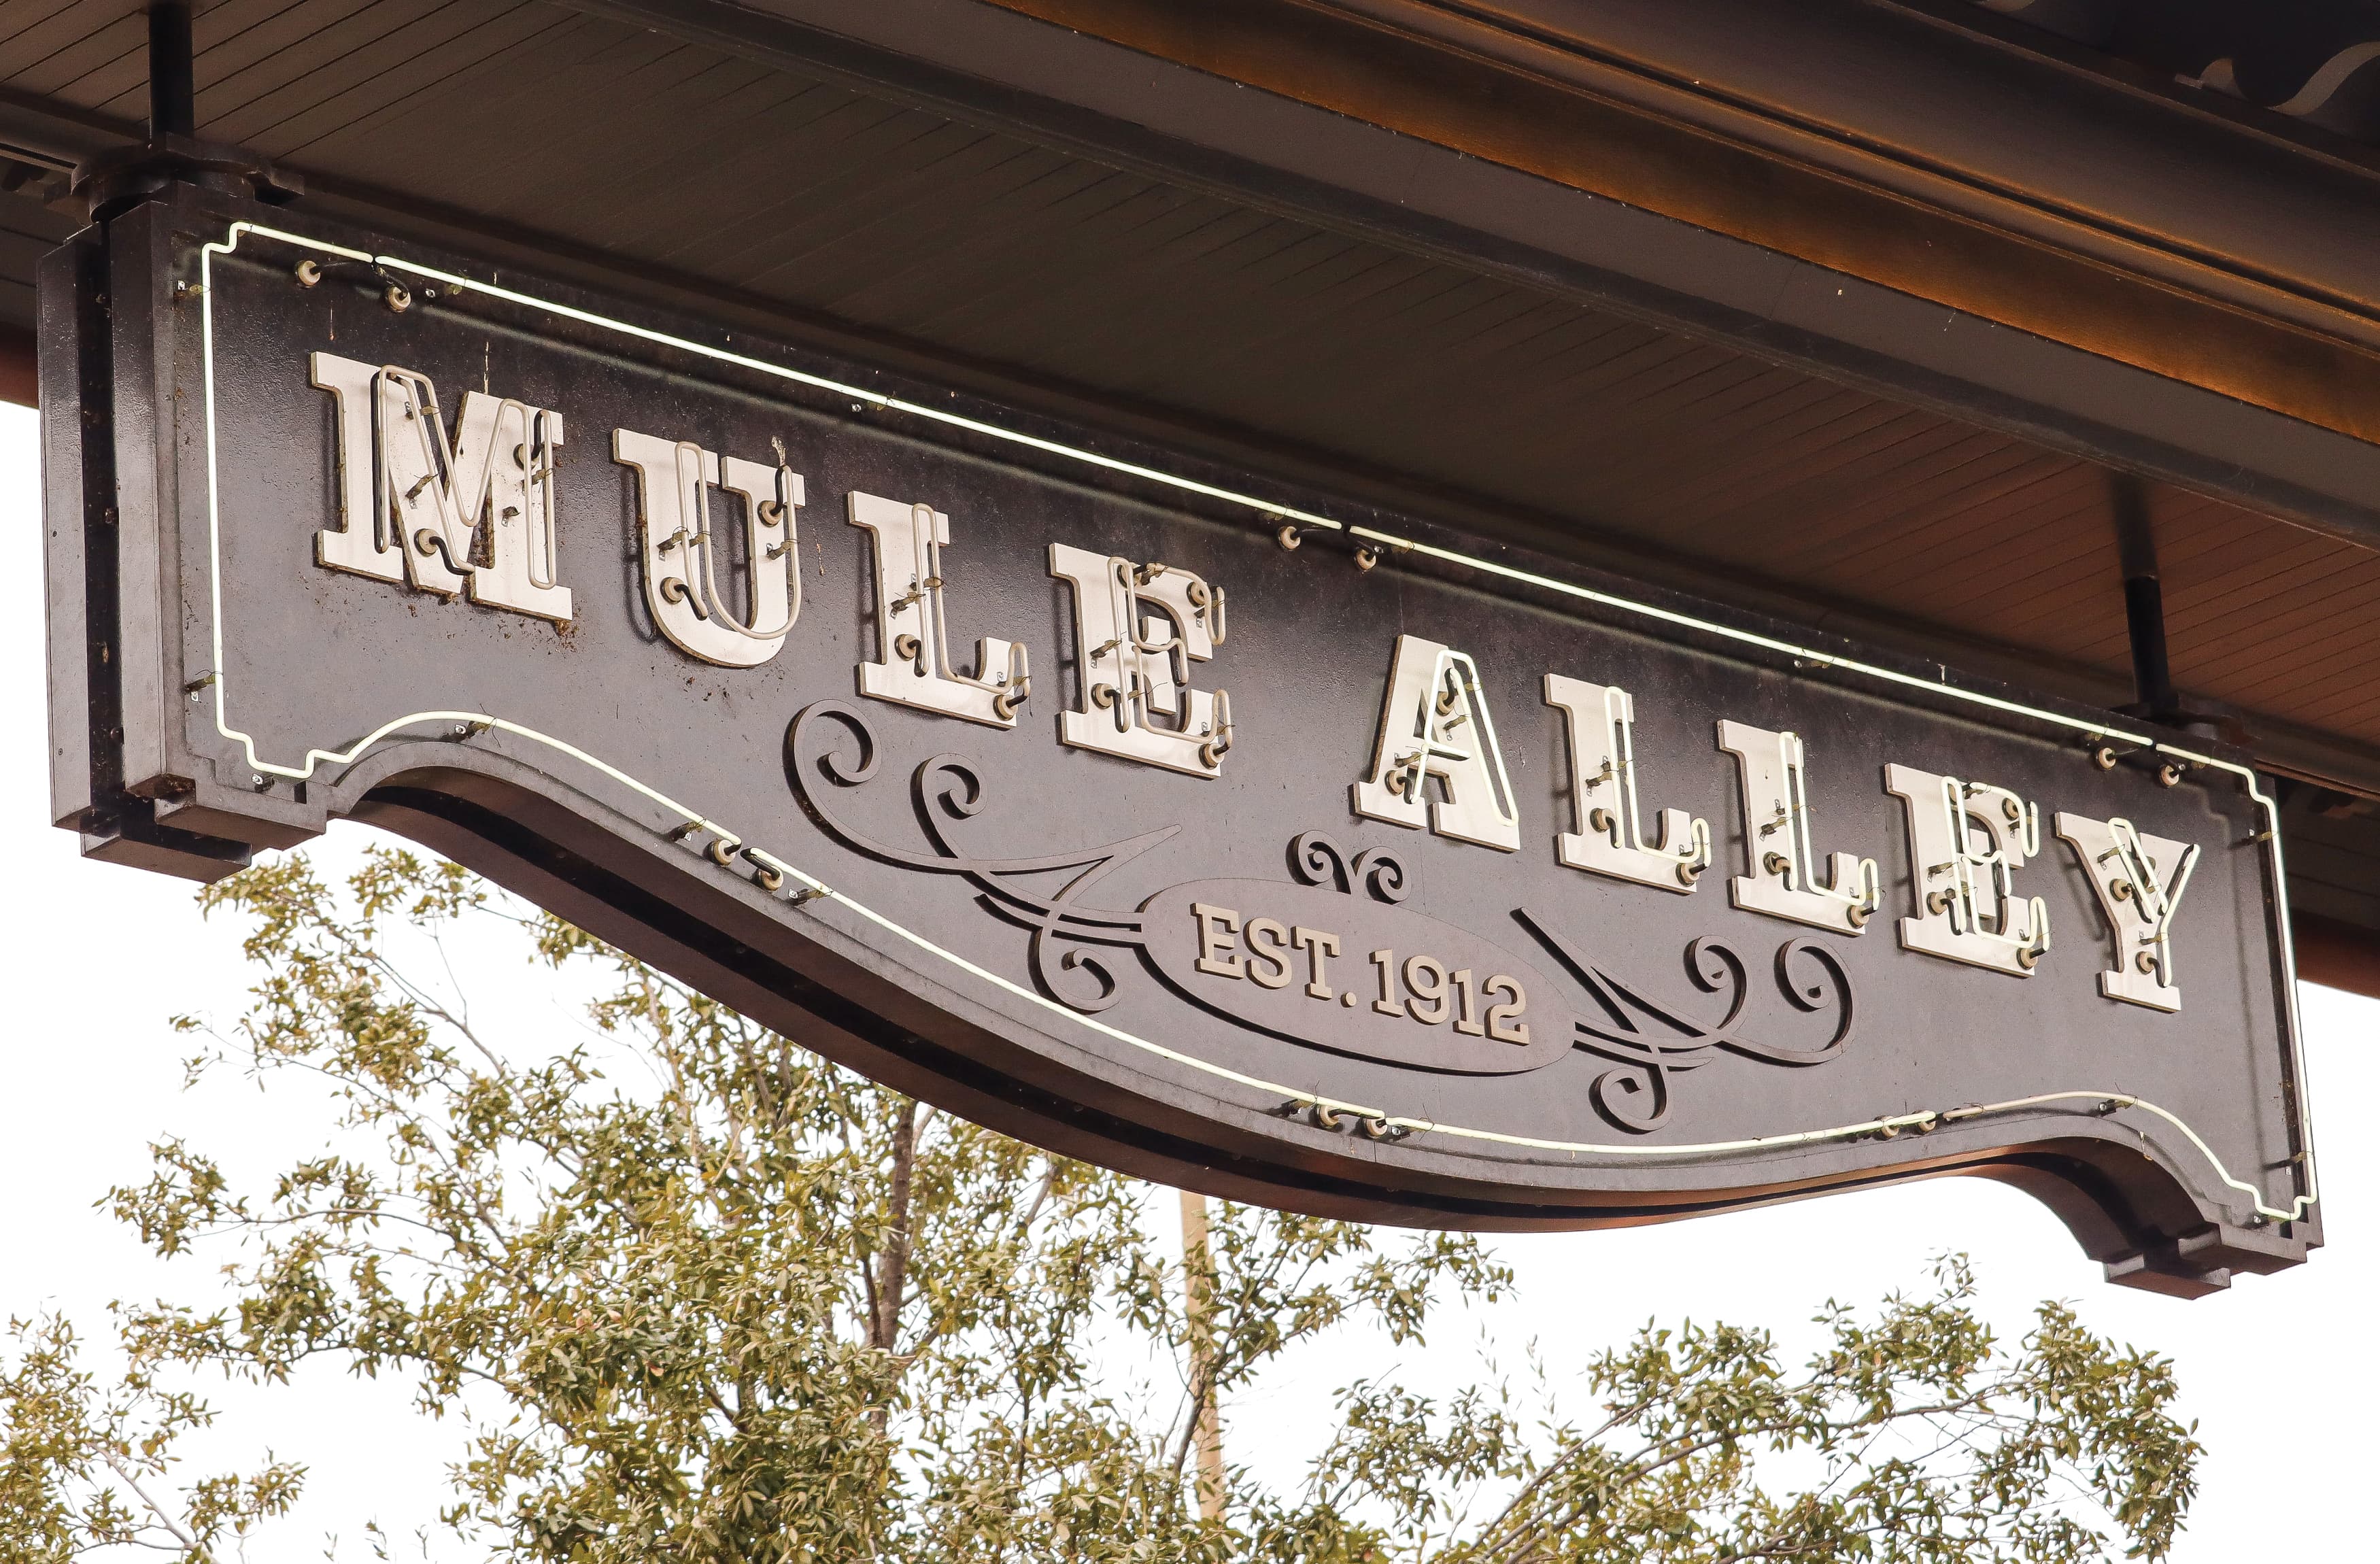 "Mule Alley" sign with est. 912 include at the Fort Worth Stockyards in Fort Worth, Texas. Decorative rustic horizontal sign with white neon letters. 